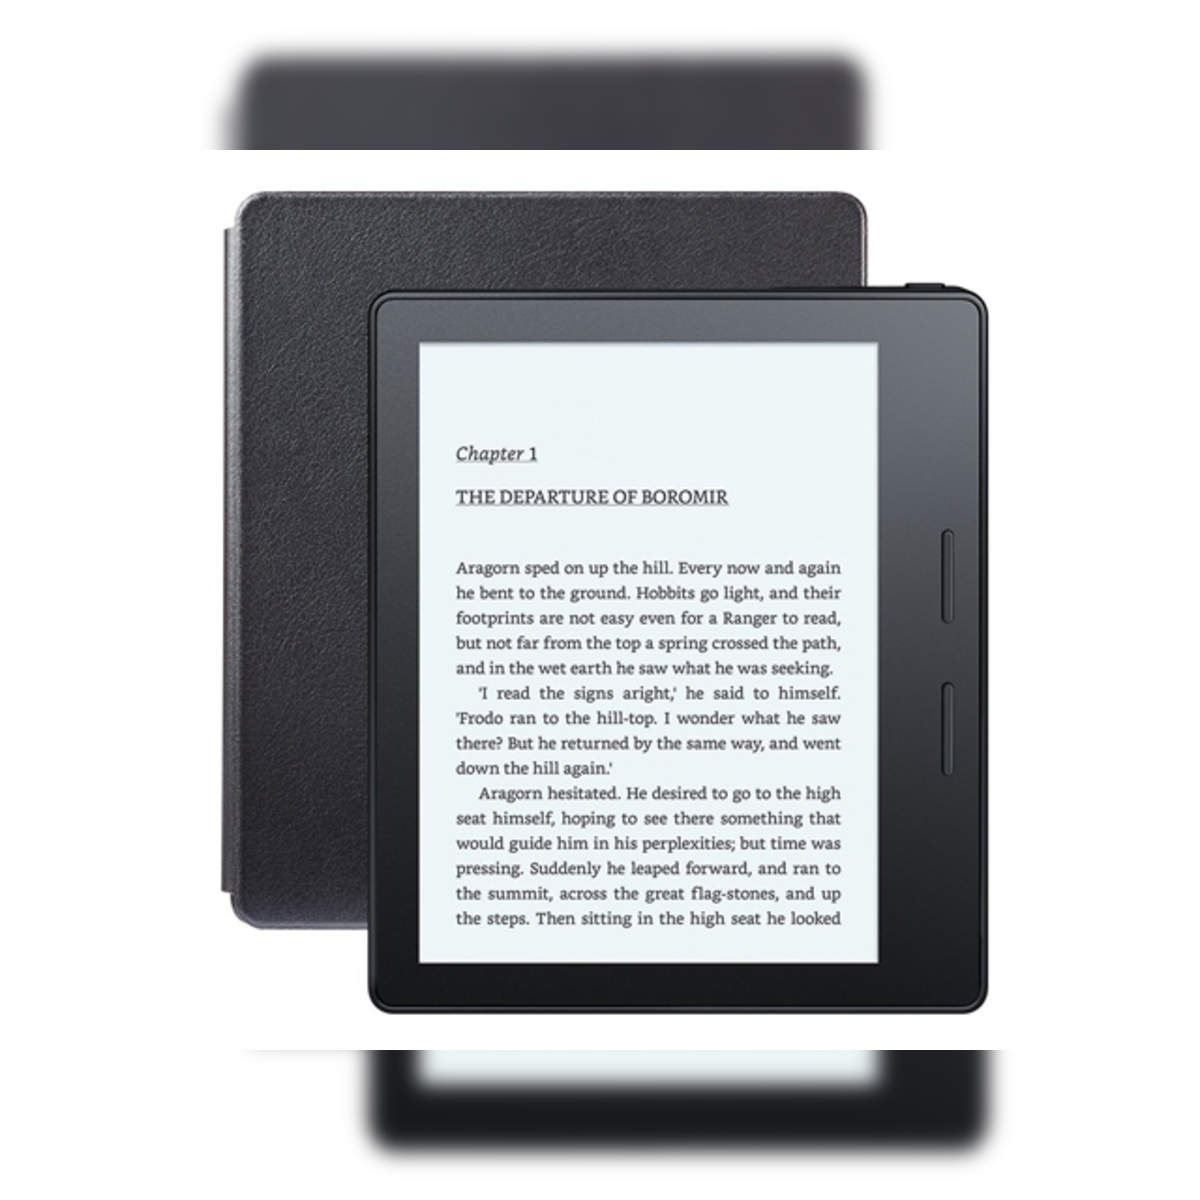 The Best Kindle Accessories To Maximize Your E-Reader's Potential